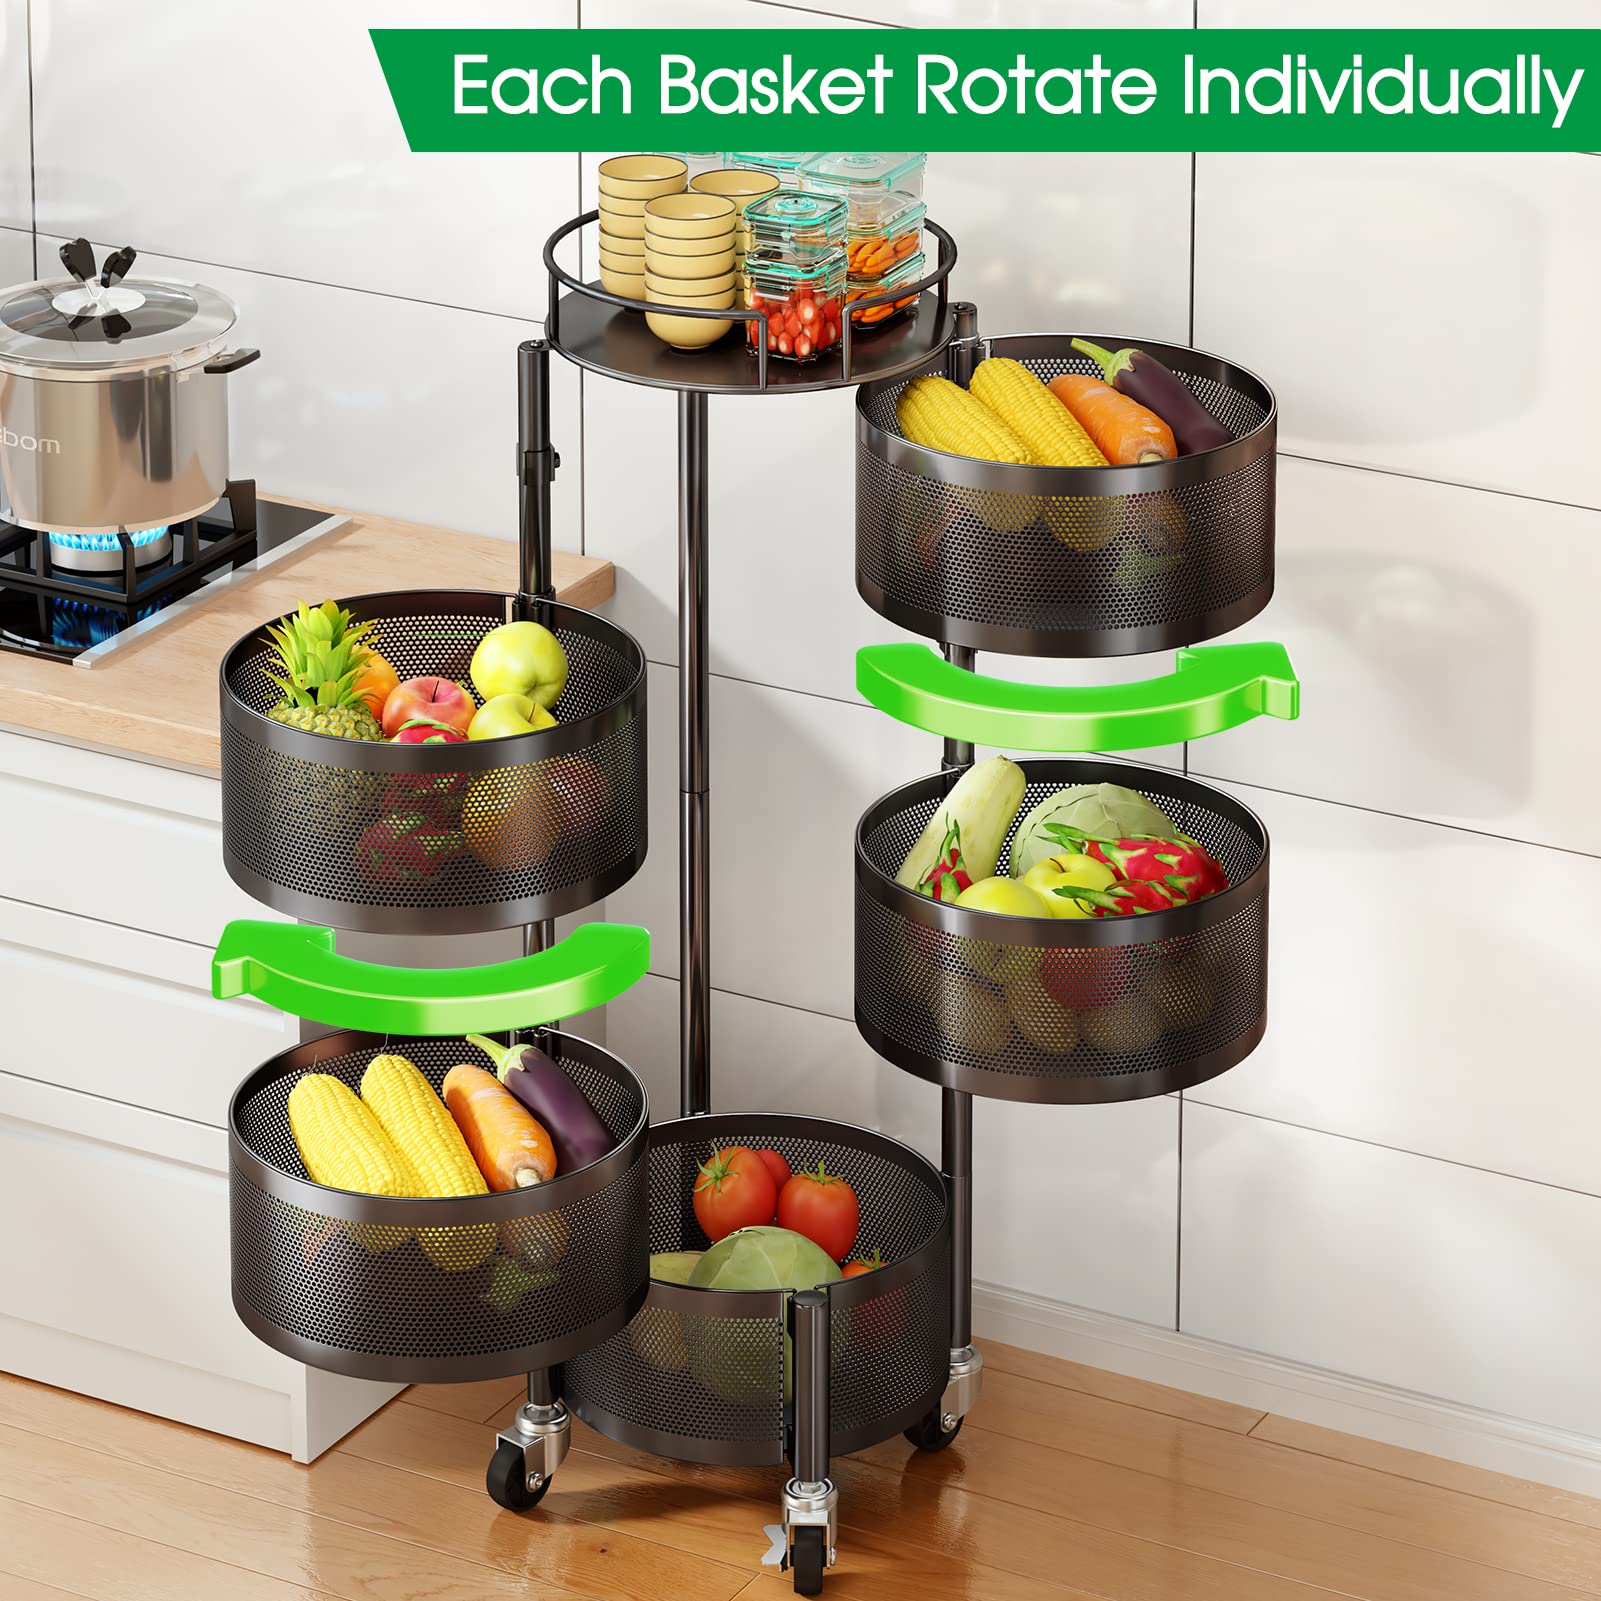 PXRACK Fruit Basket for Kitchen, 5 Tier Circular Rotating Basket Large Storage Rack with Wheels, Fruit and Vegetable Metal Wire Shelf with Top Lid for Living Room, Office, Black